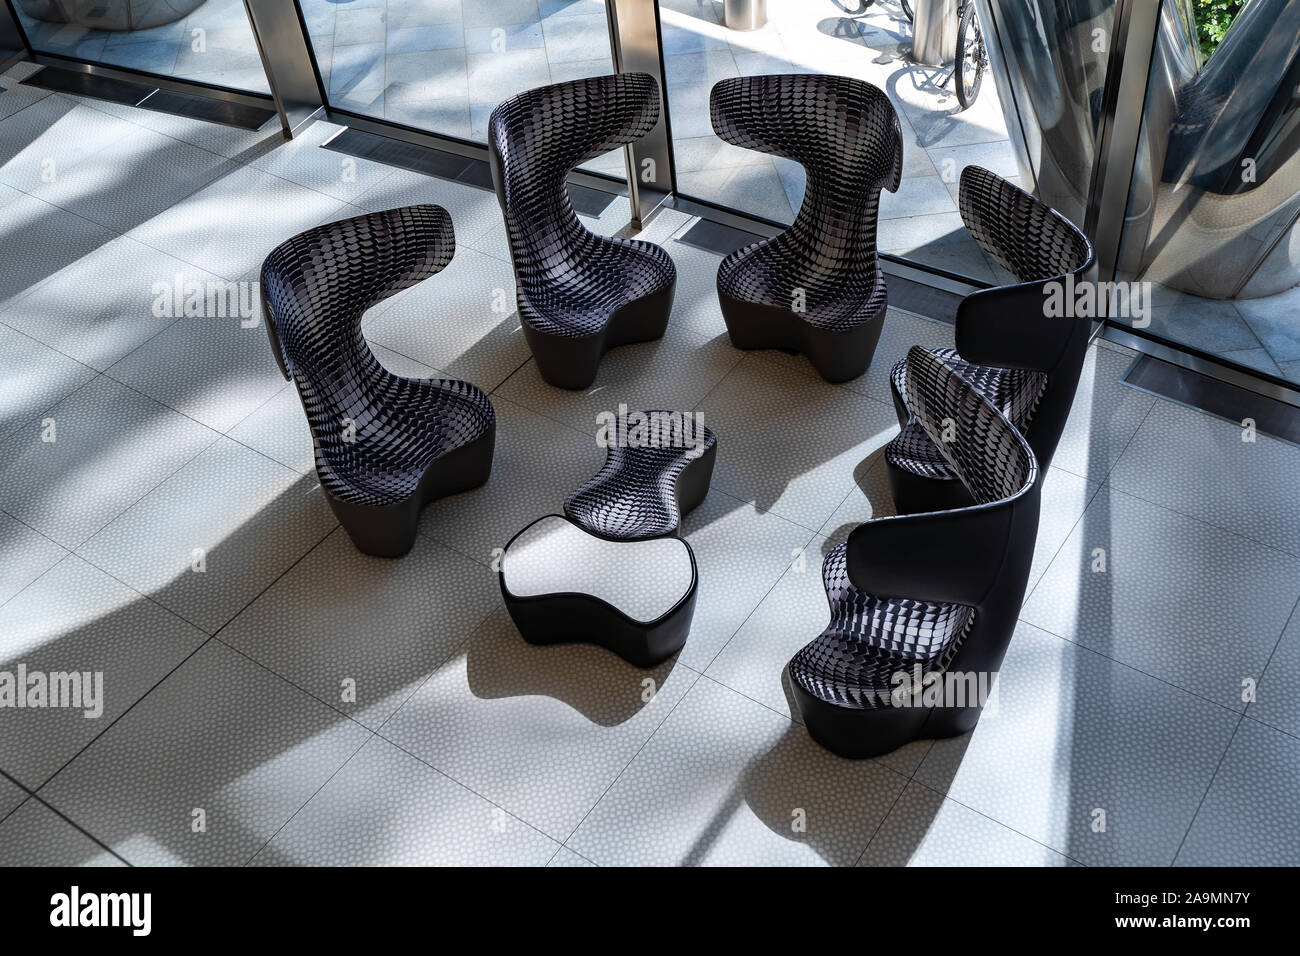 Warsaw, Poland - August 2019: View of the restaurant-bar zone inside the Warsaw Spire Building with armchairs and ottomans. Stock Photo